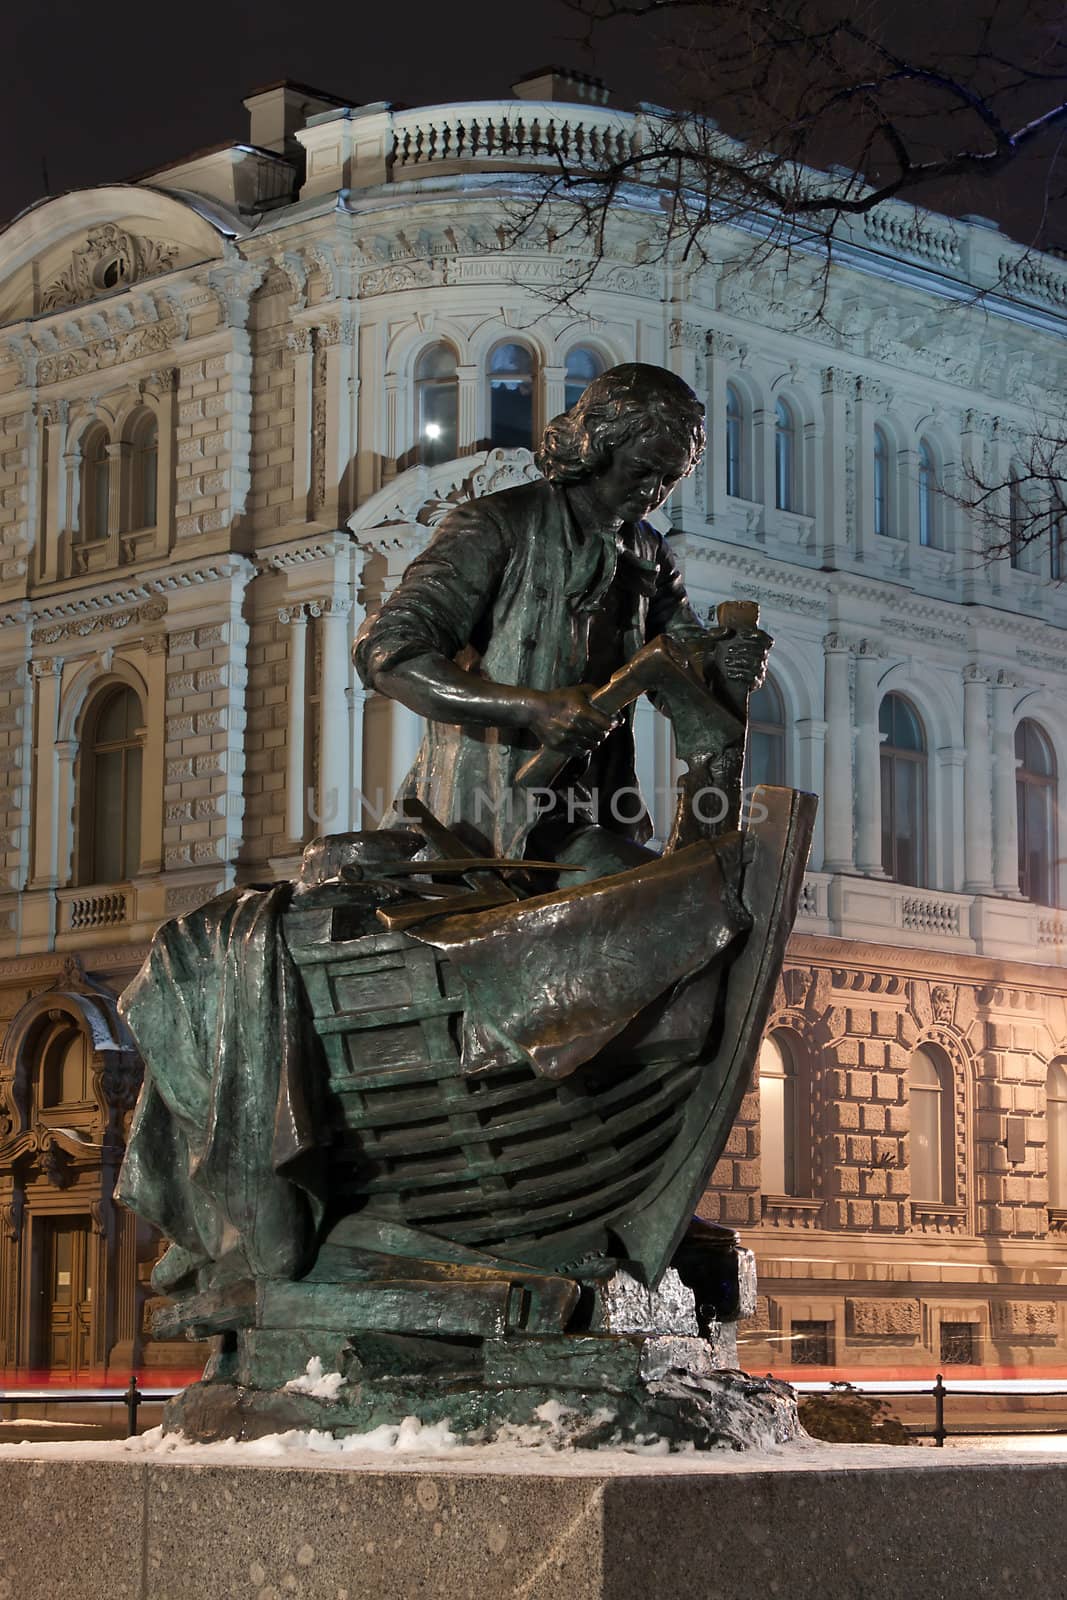 Verical view of Bronze statue Peter the Great carpenter at night, St. Petersburg, Russia